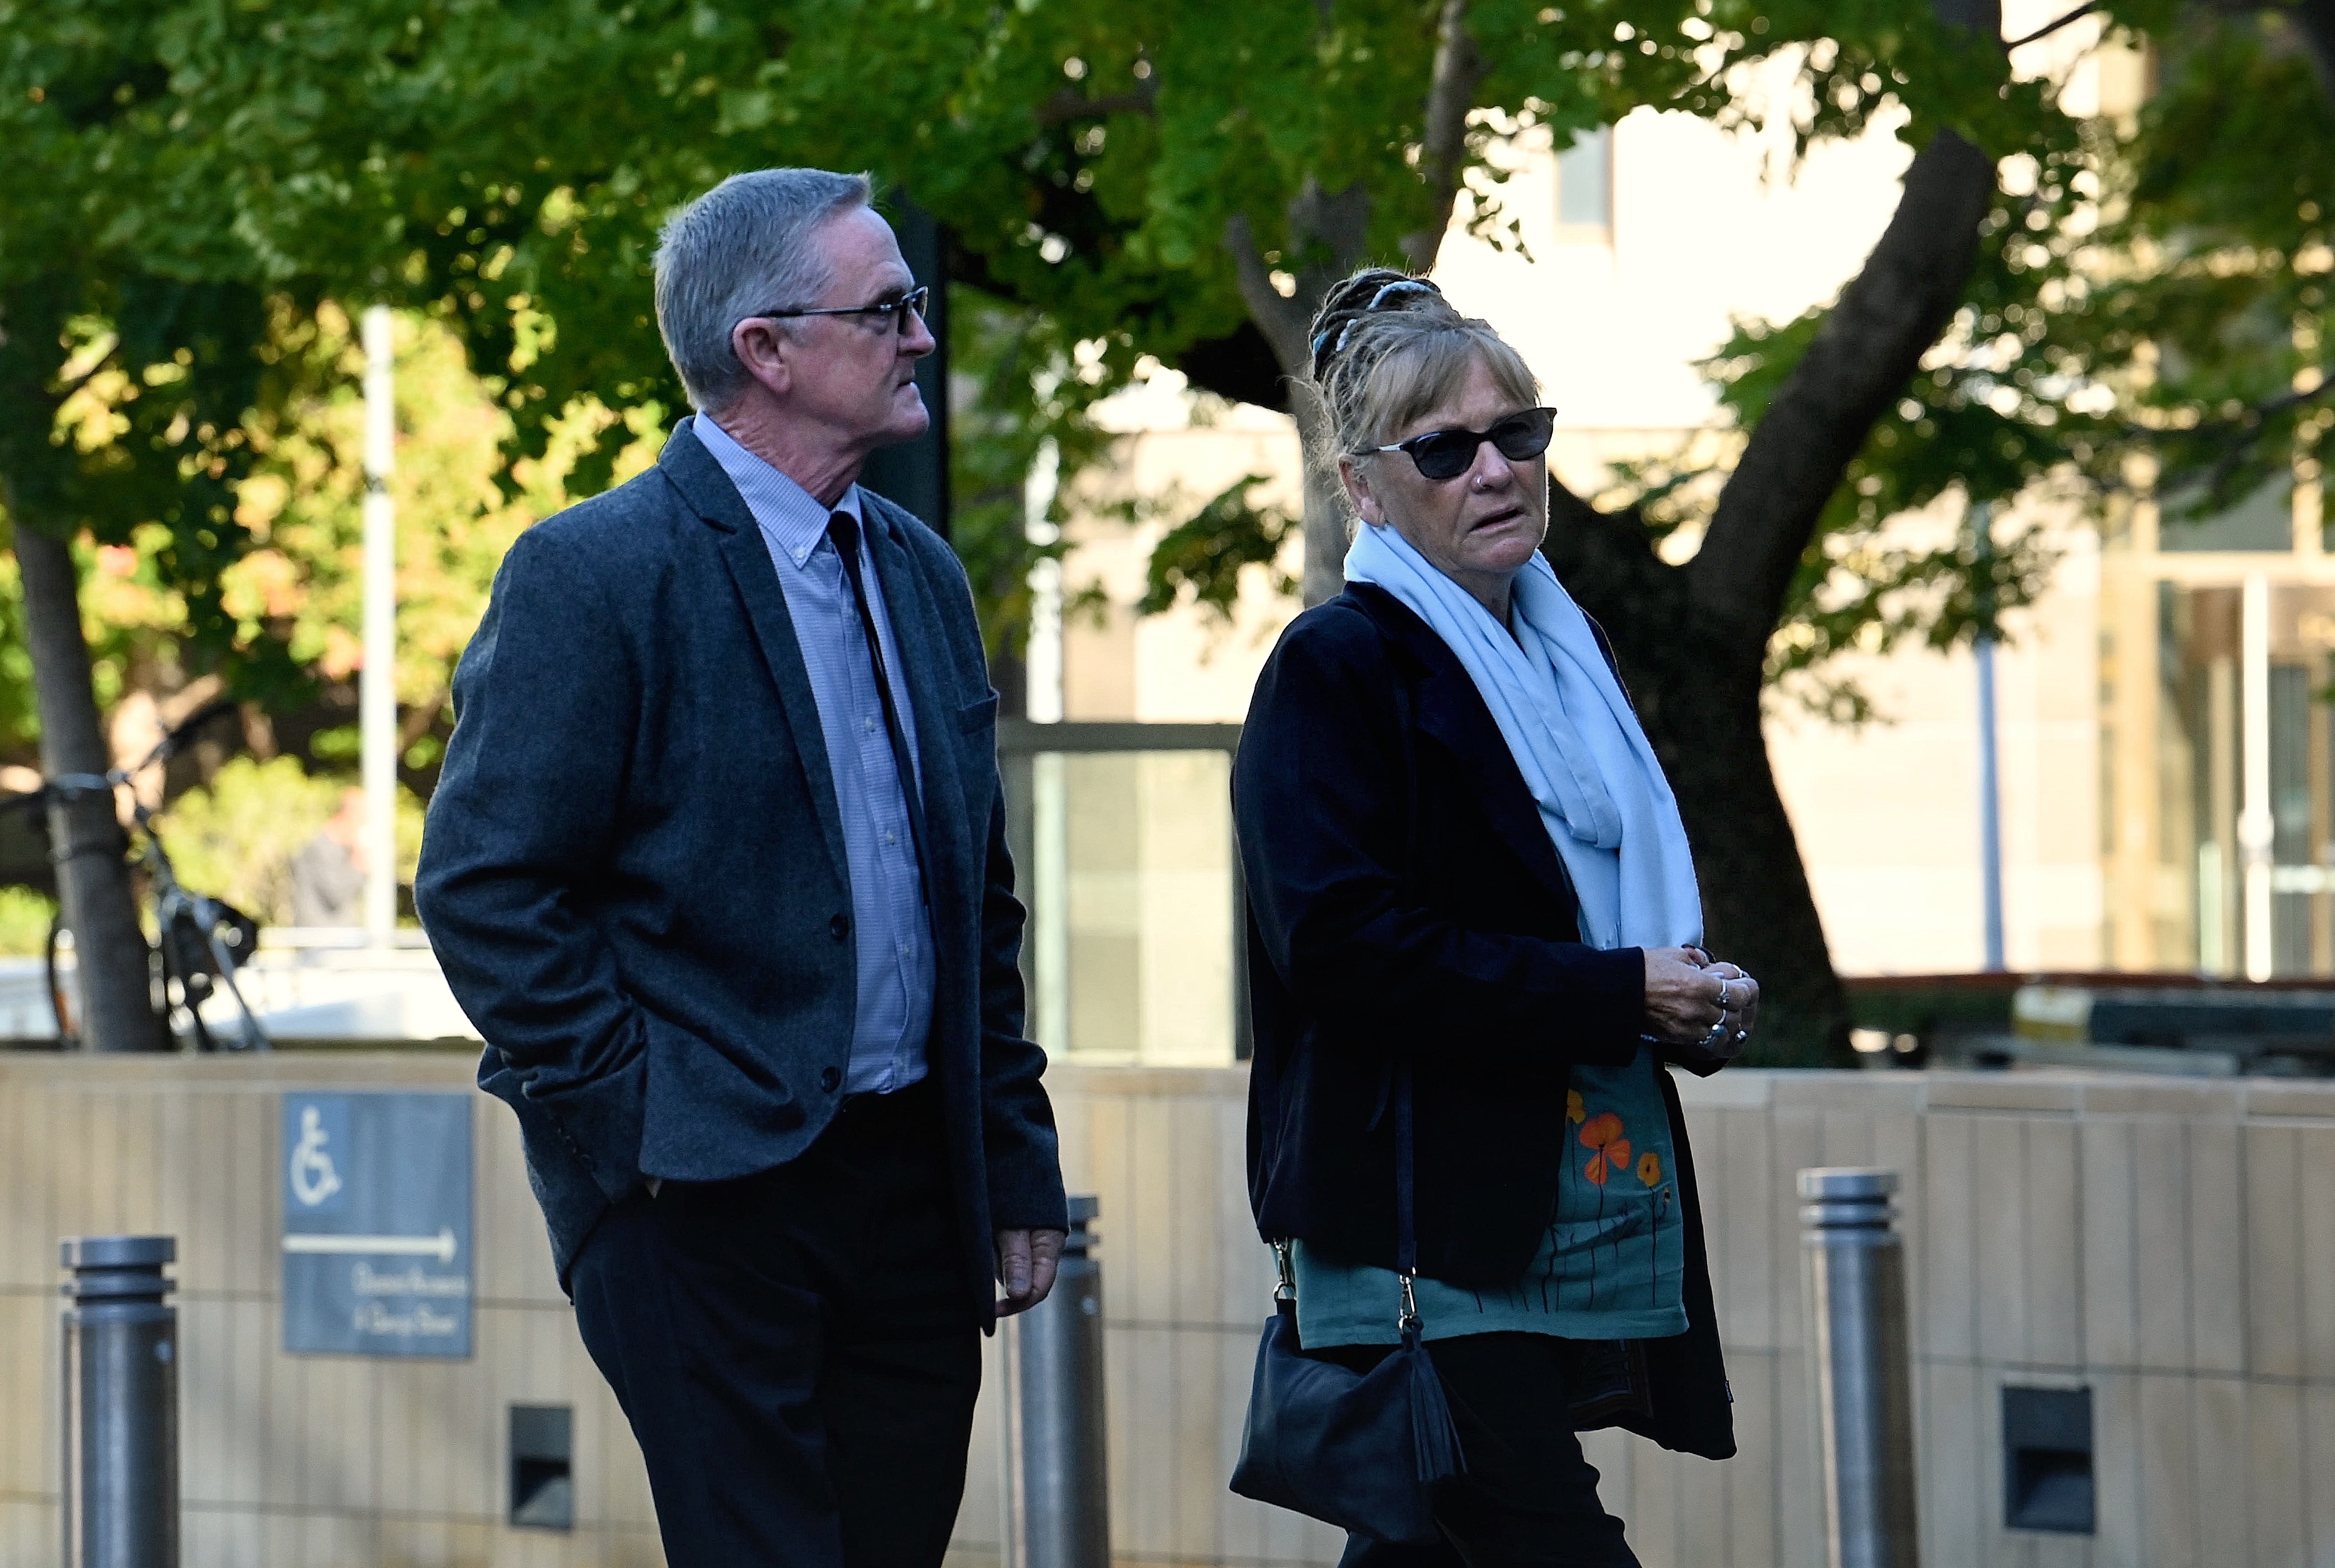 Simon Fleming's mother supported her son throughout his trial, testifying he had longstanding mental health issues.